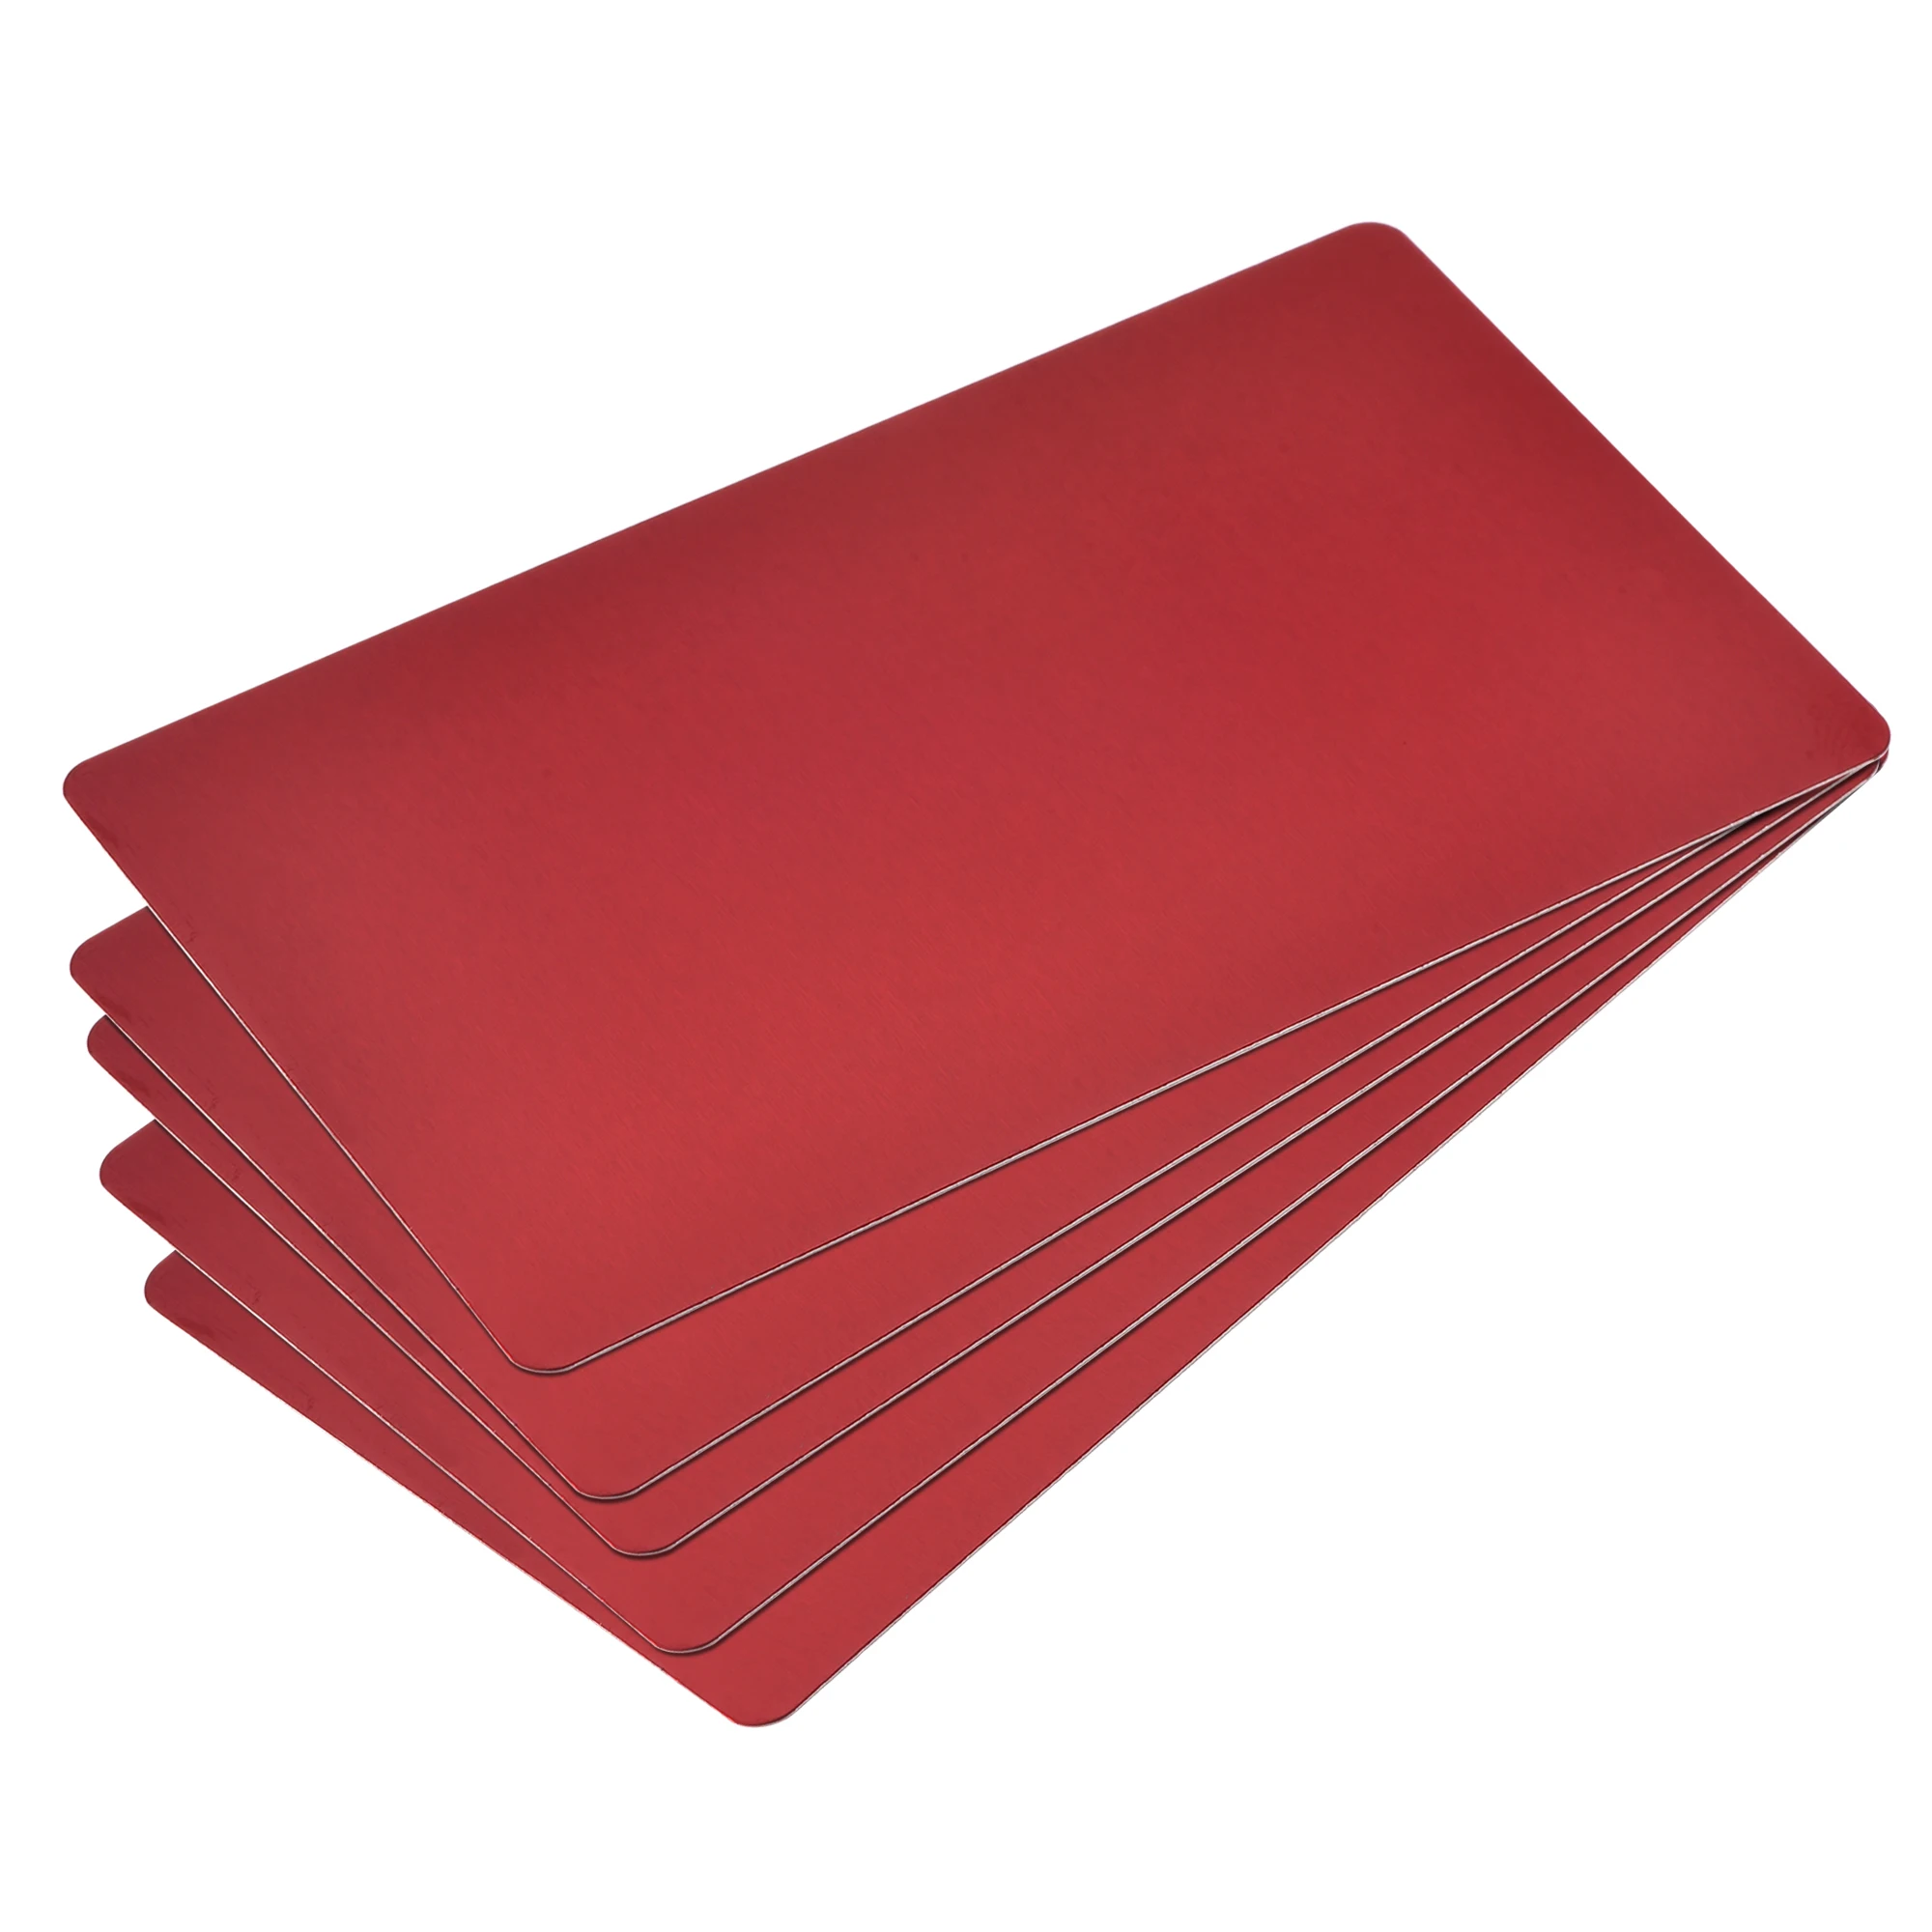 

Uxcell Blank Metal Card 85x50x0.4mm Painted Aluminum Plate Red 10 Pcs for Laser Engraving